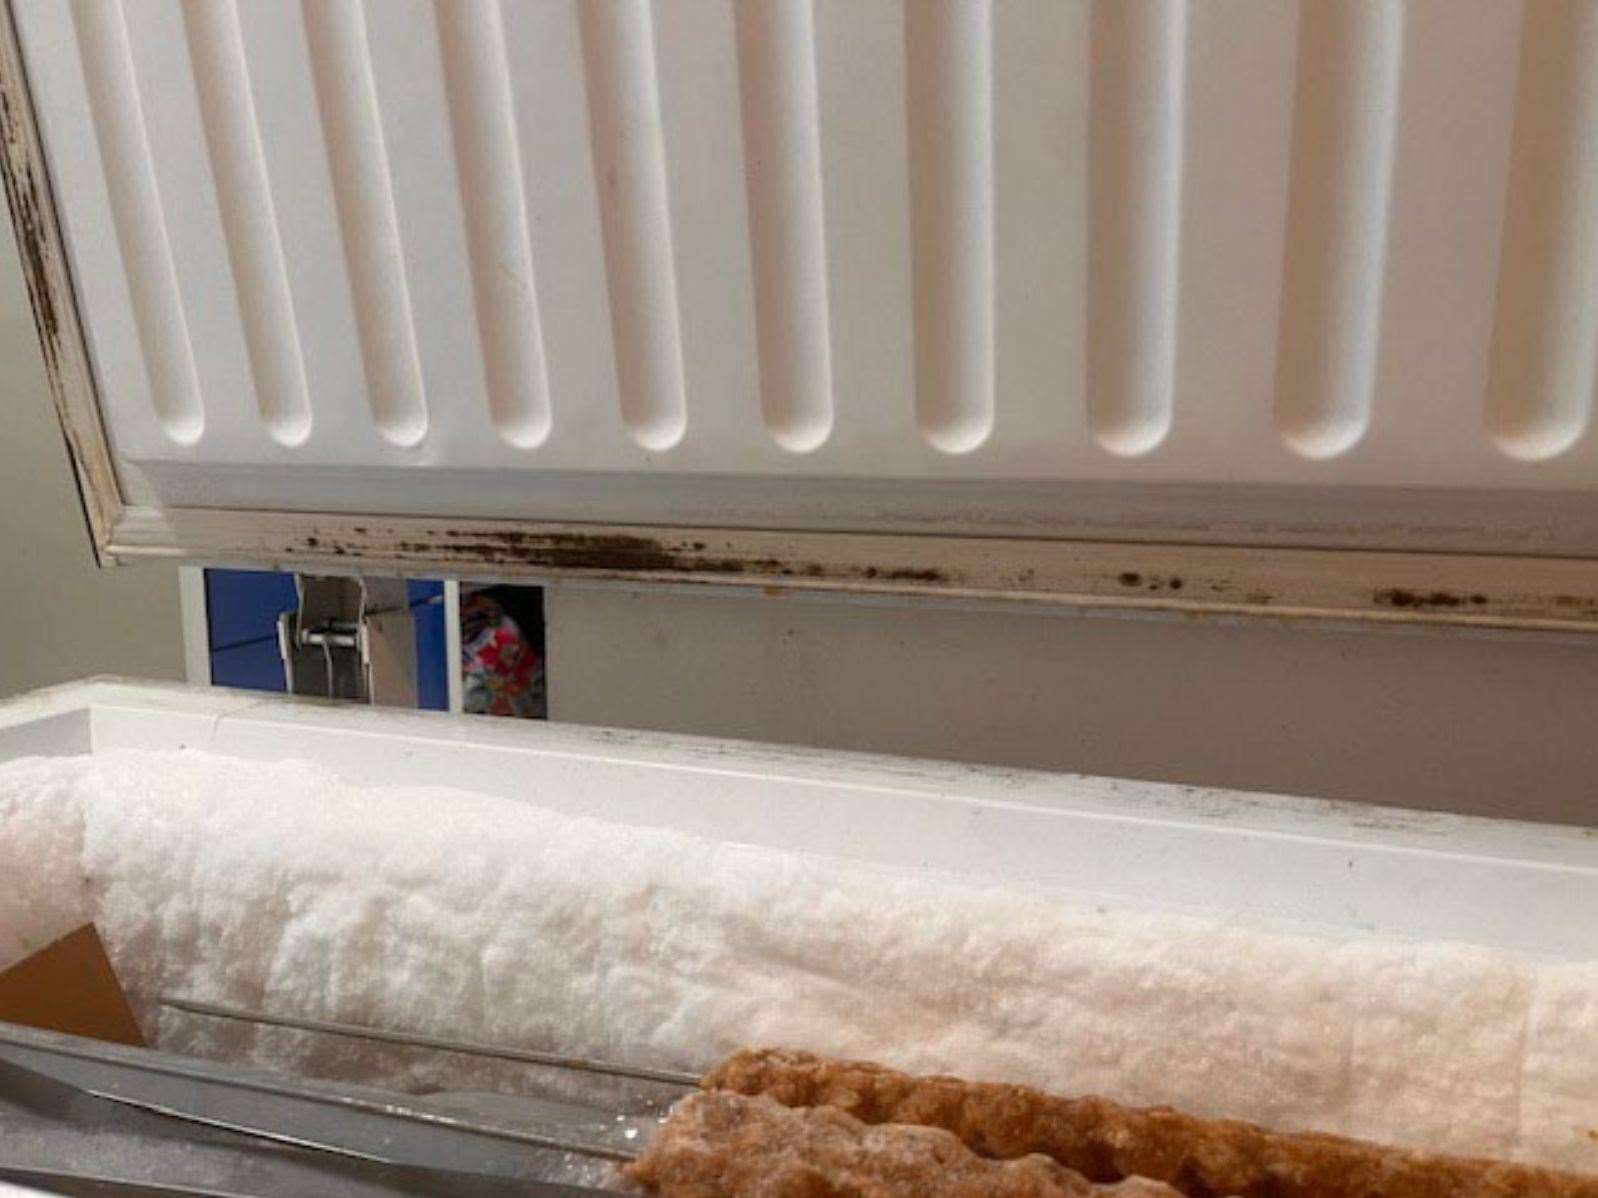 Mould on the freezer seal – inches away from open high-risk food